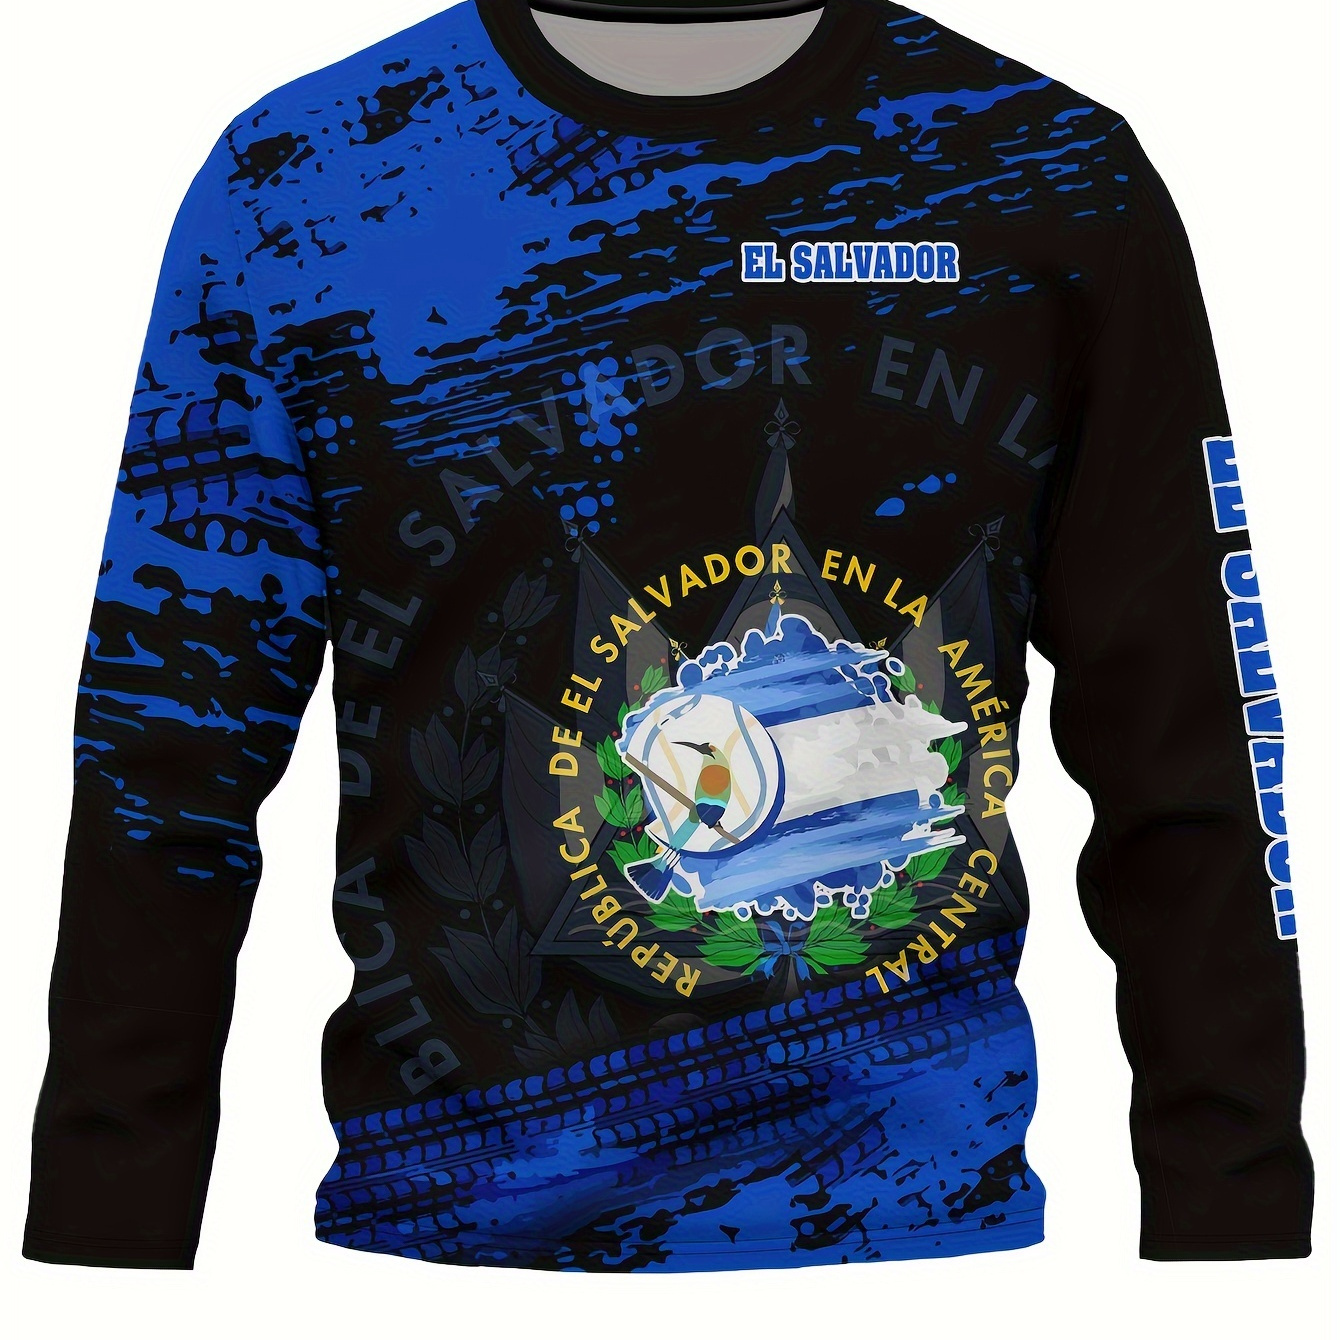 

El Salvador Theme Flag And Tire Track Pattern Crew Neck And Long Sleeve T-shirt, Stylish And Trendy Tops For Men's Spring And Autumn Outdoors Leisurewear